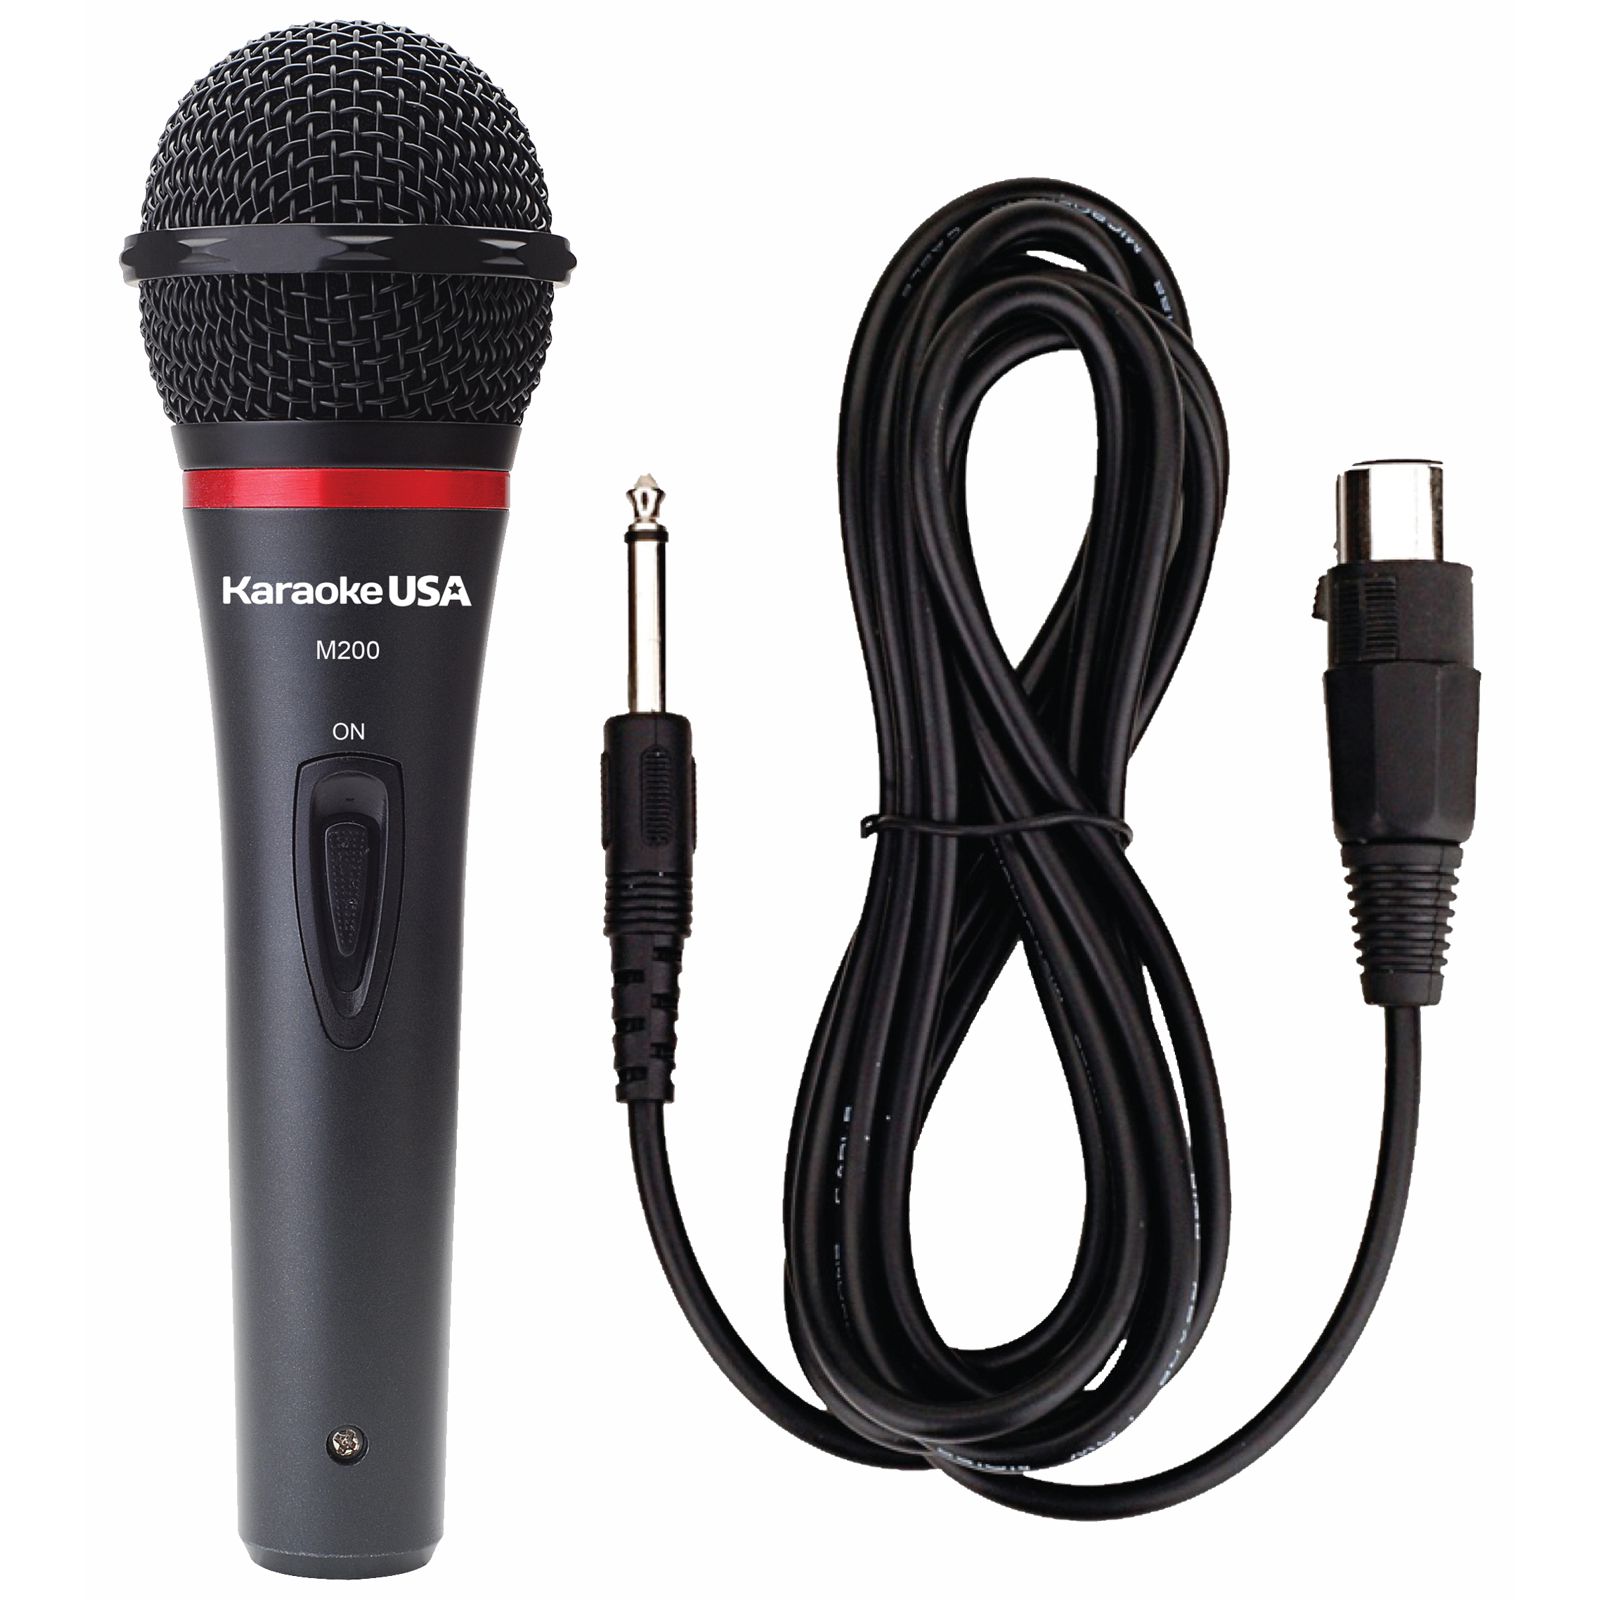 M200 - Professional Microphone With Durable Metal Body And Grill (Removable Cord)